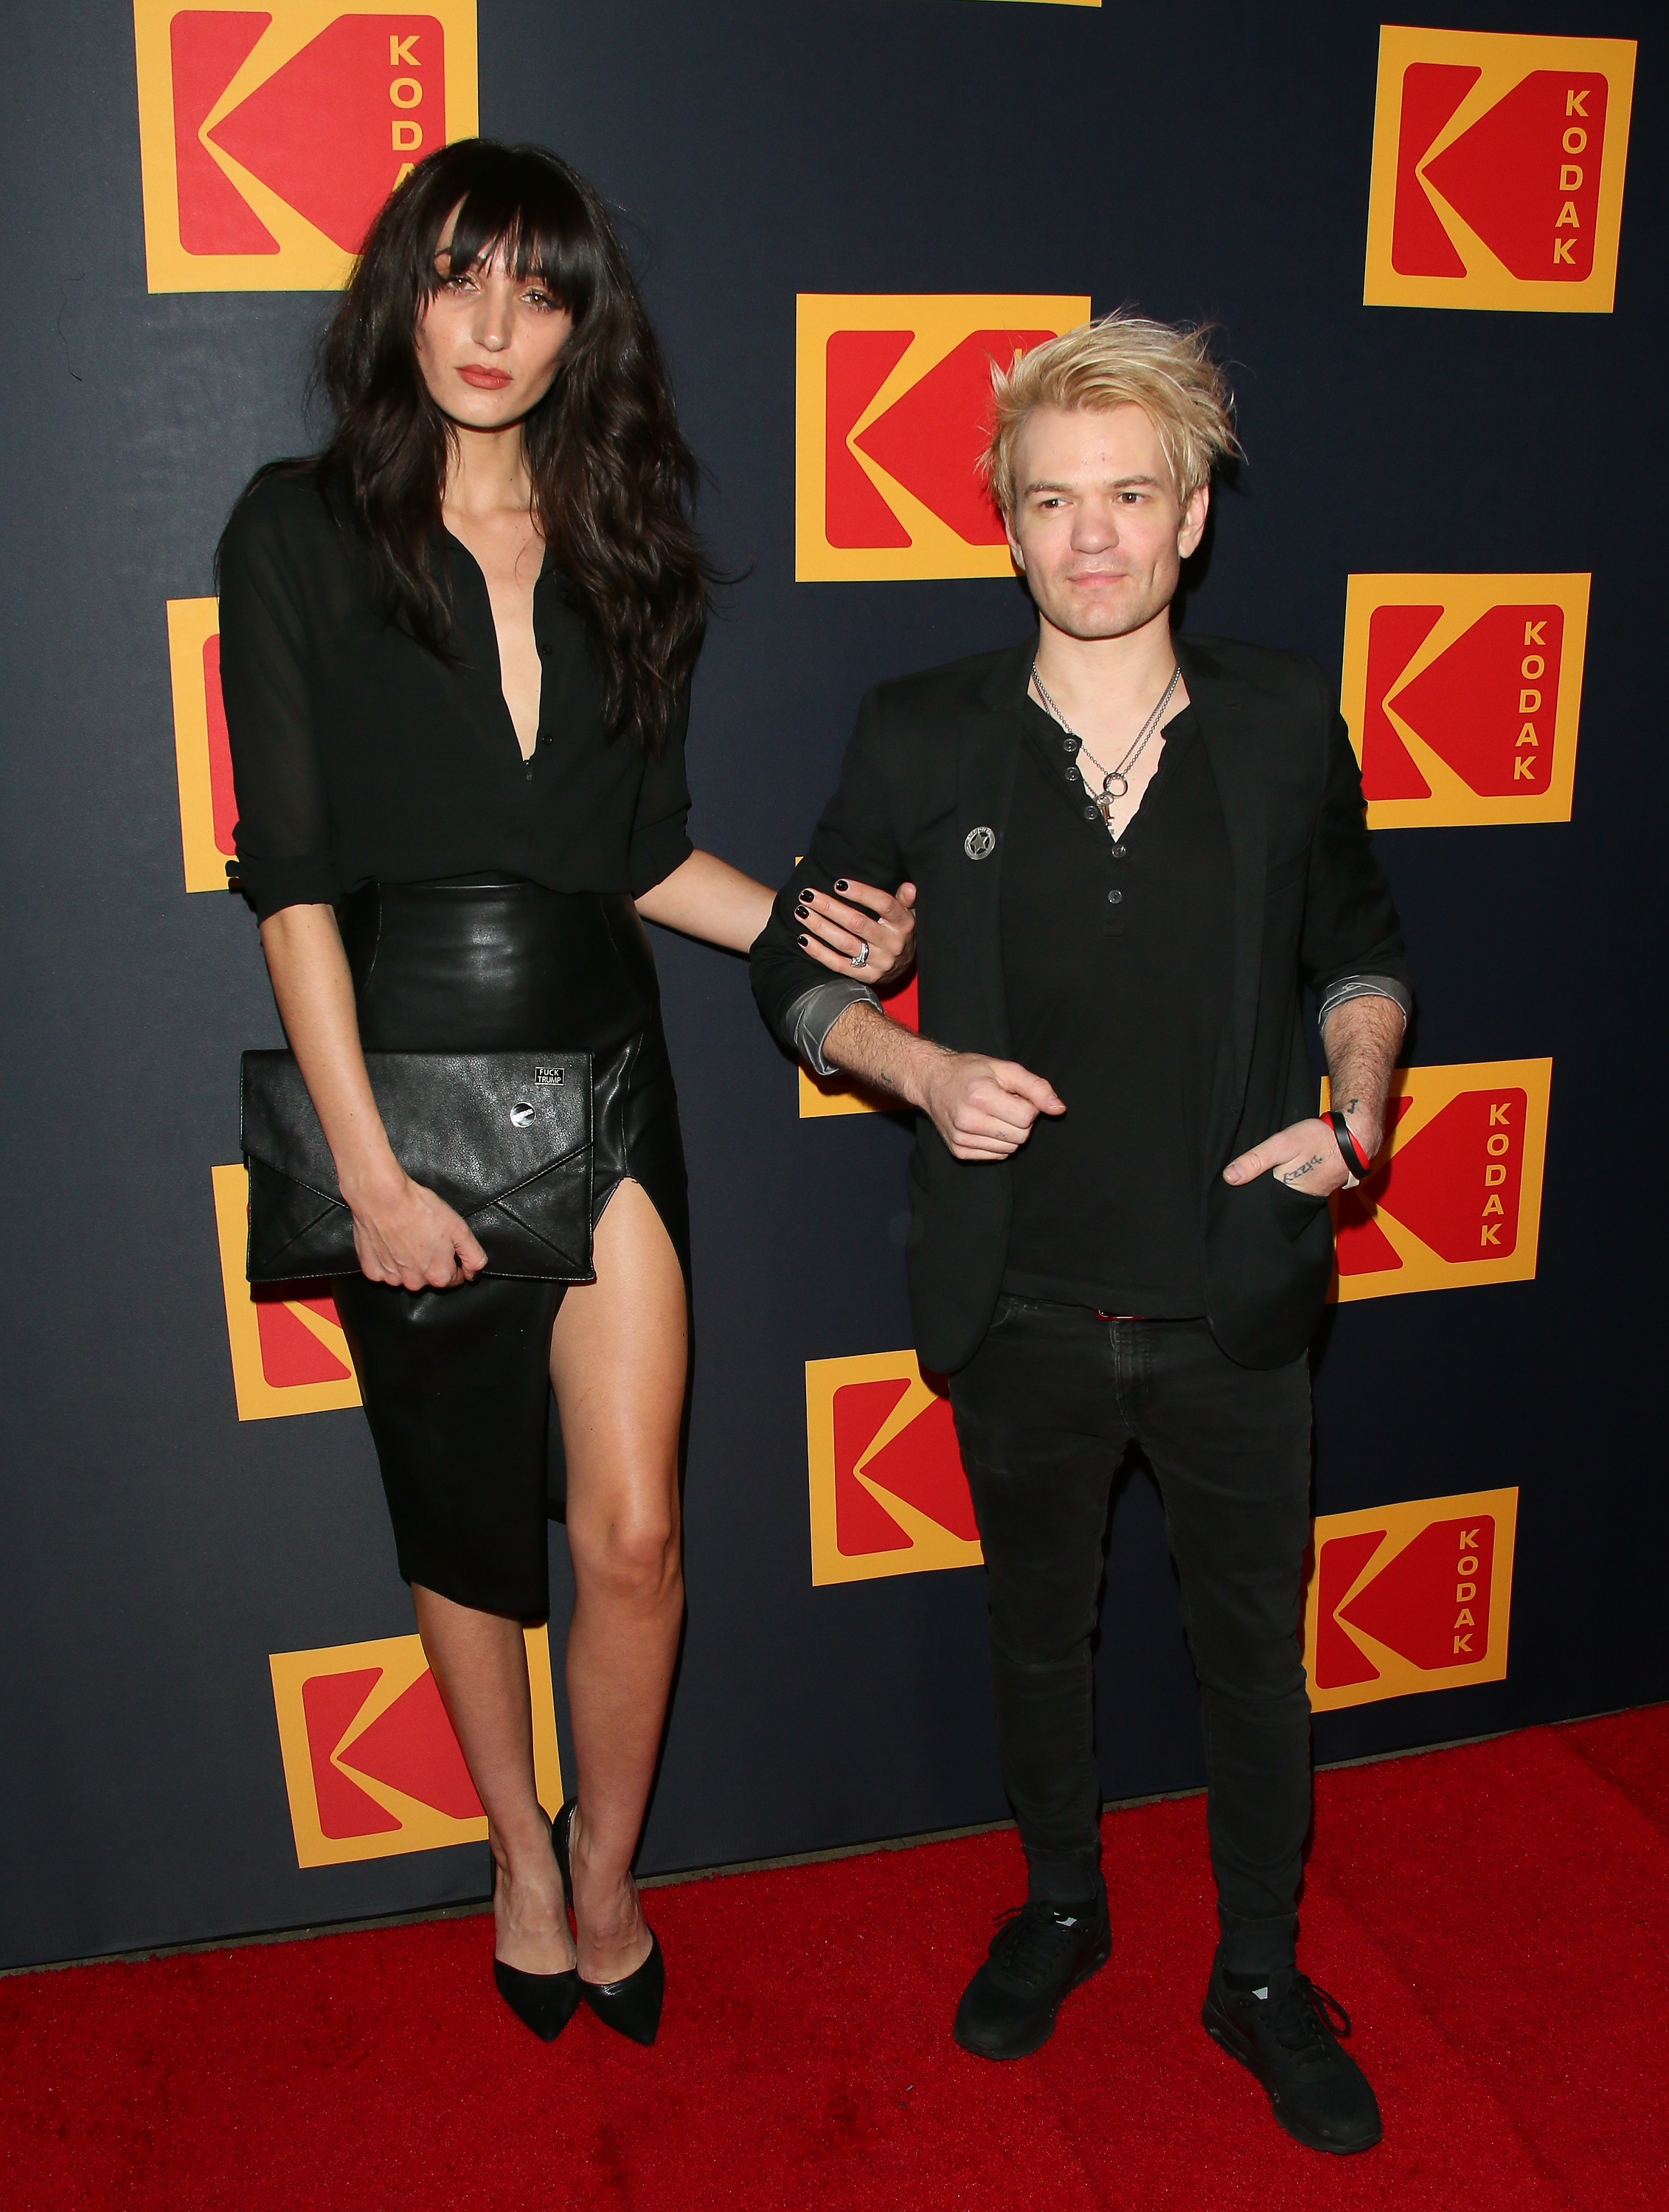 Ariana Cooper and Deryck Whibley attend the 3rd annual Kodak Awards at Hudson Loft on February 15, 2019 in Los Angeles, California. | Source: Getty Images